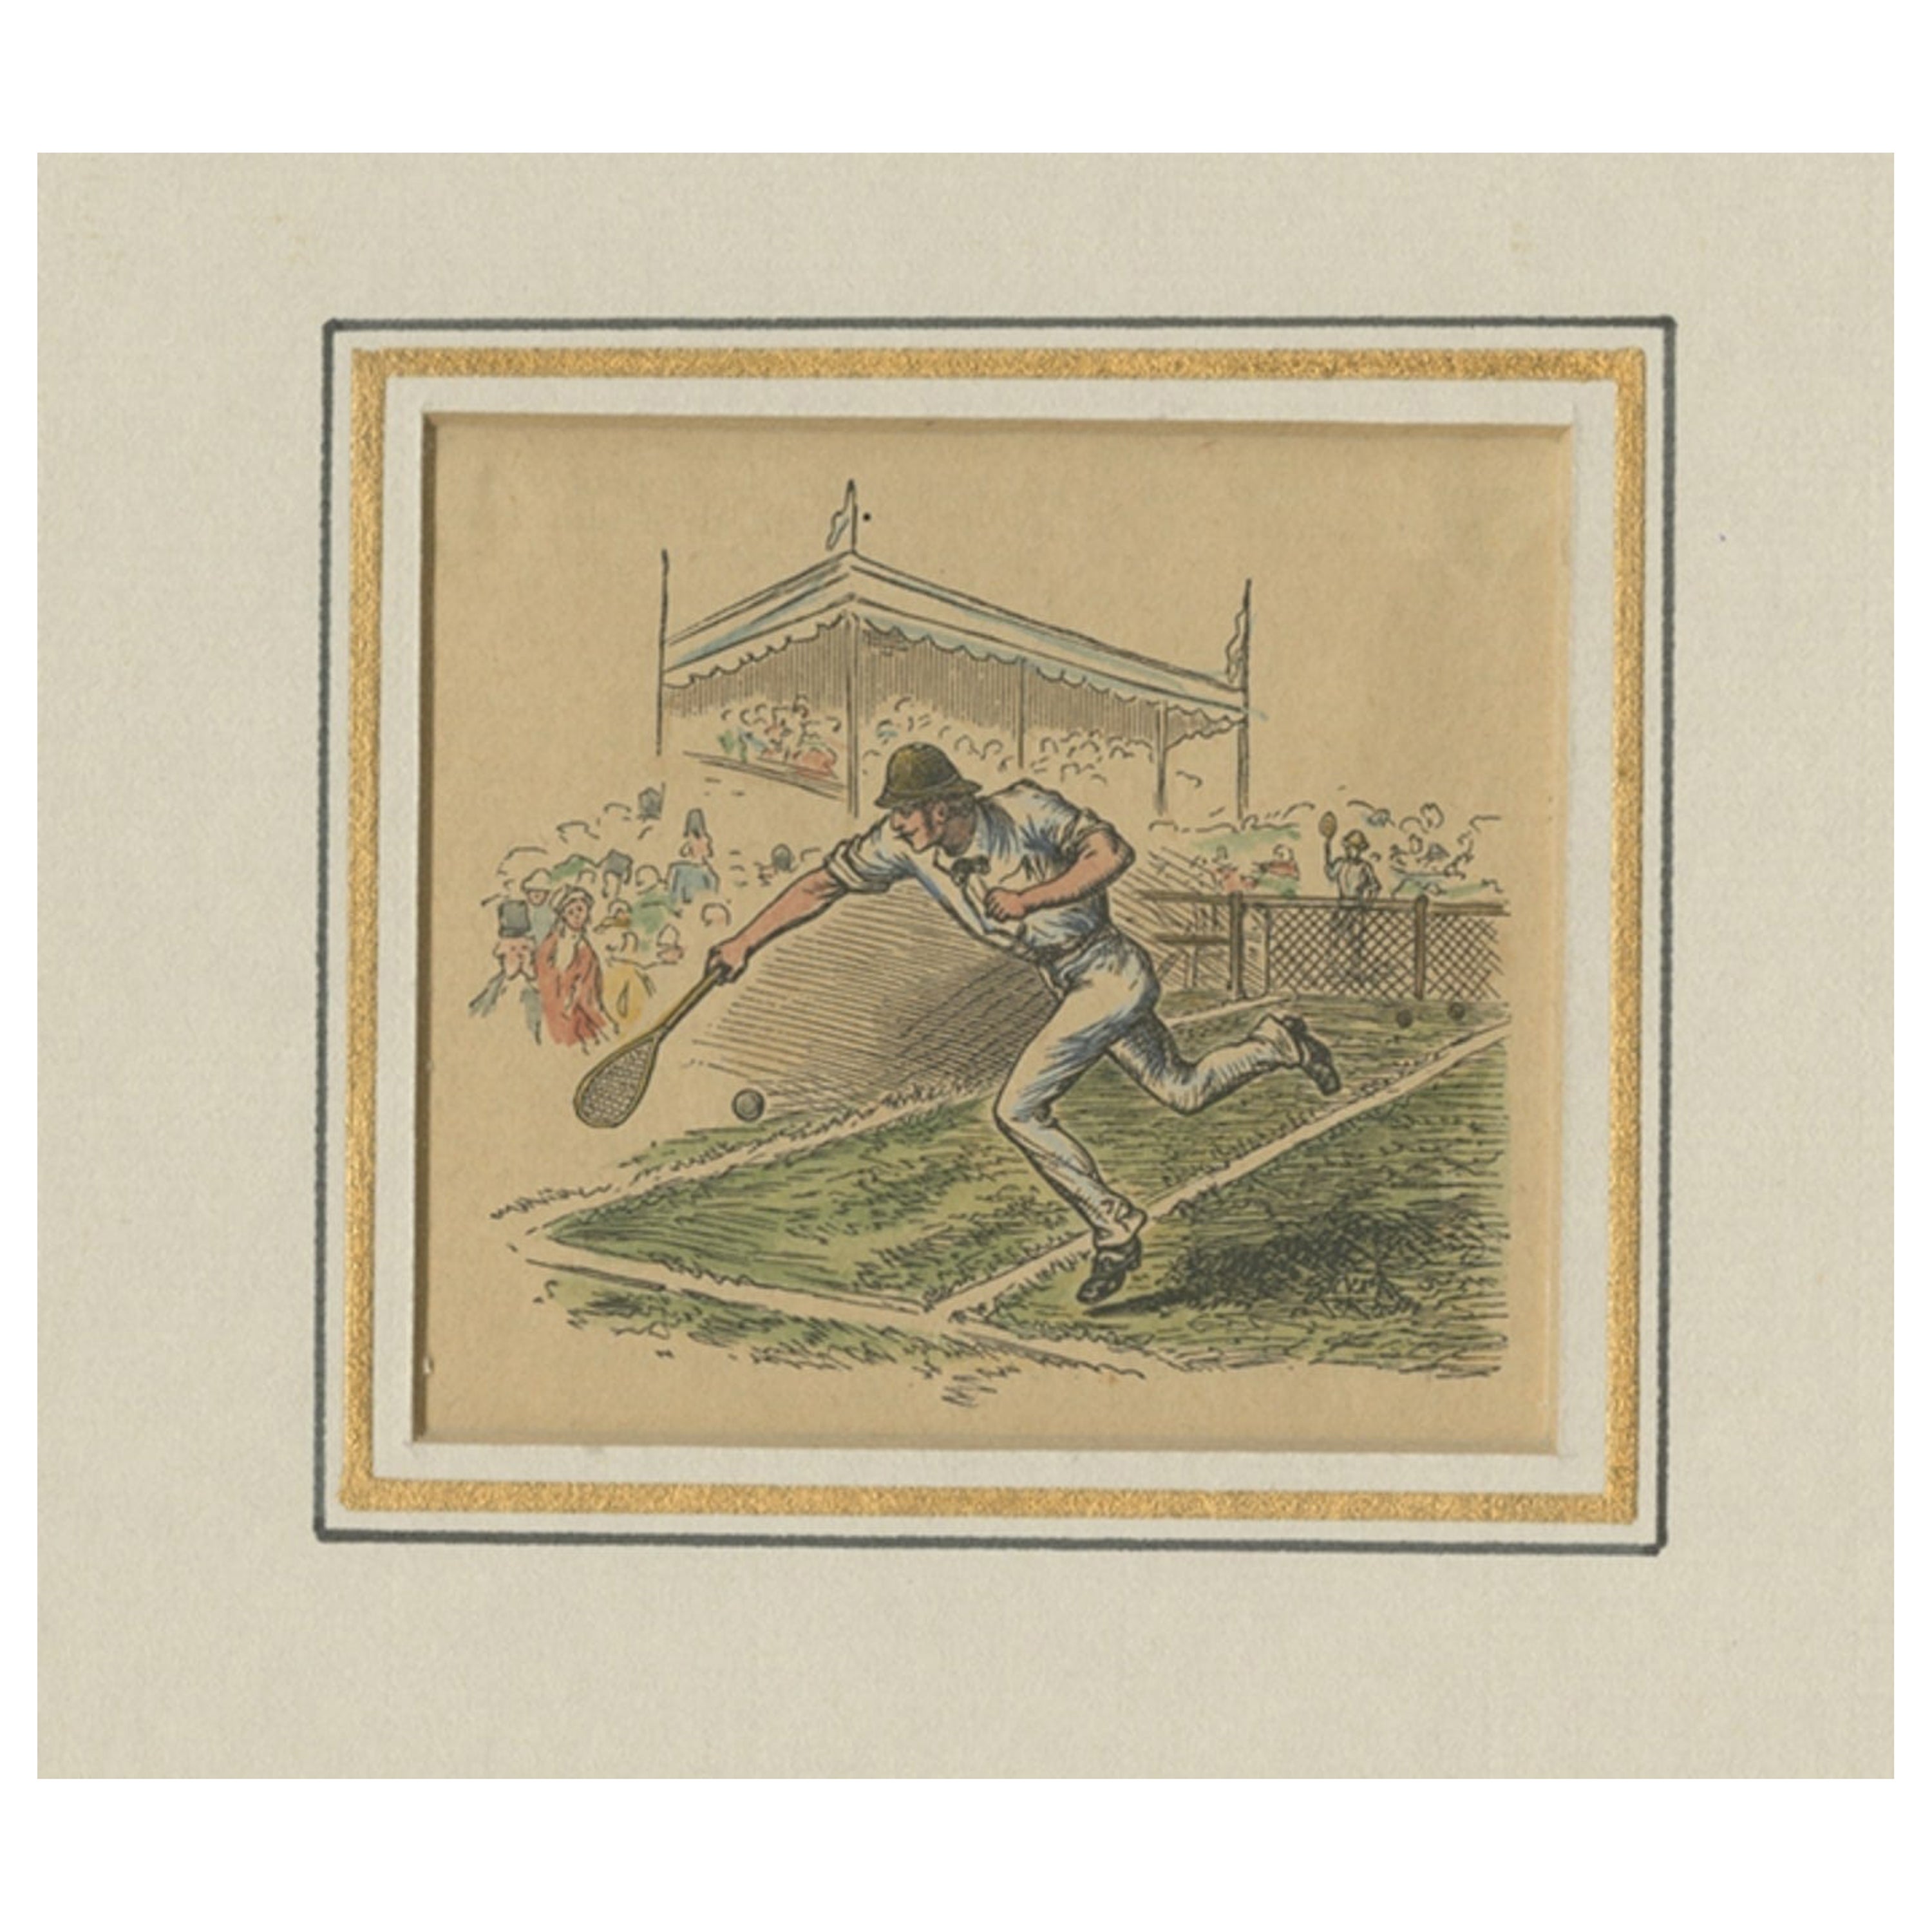 Small Antique Hand-Colored Print of a Man Playing Tennis, c.1890